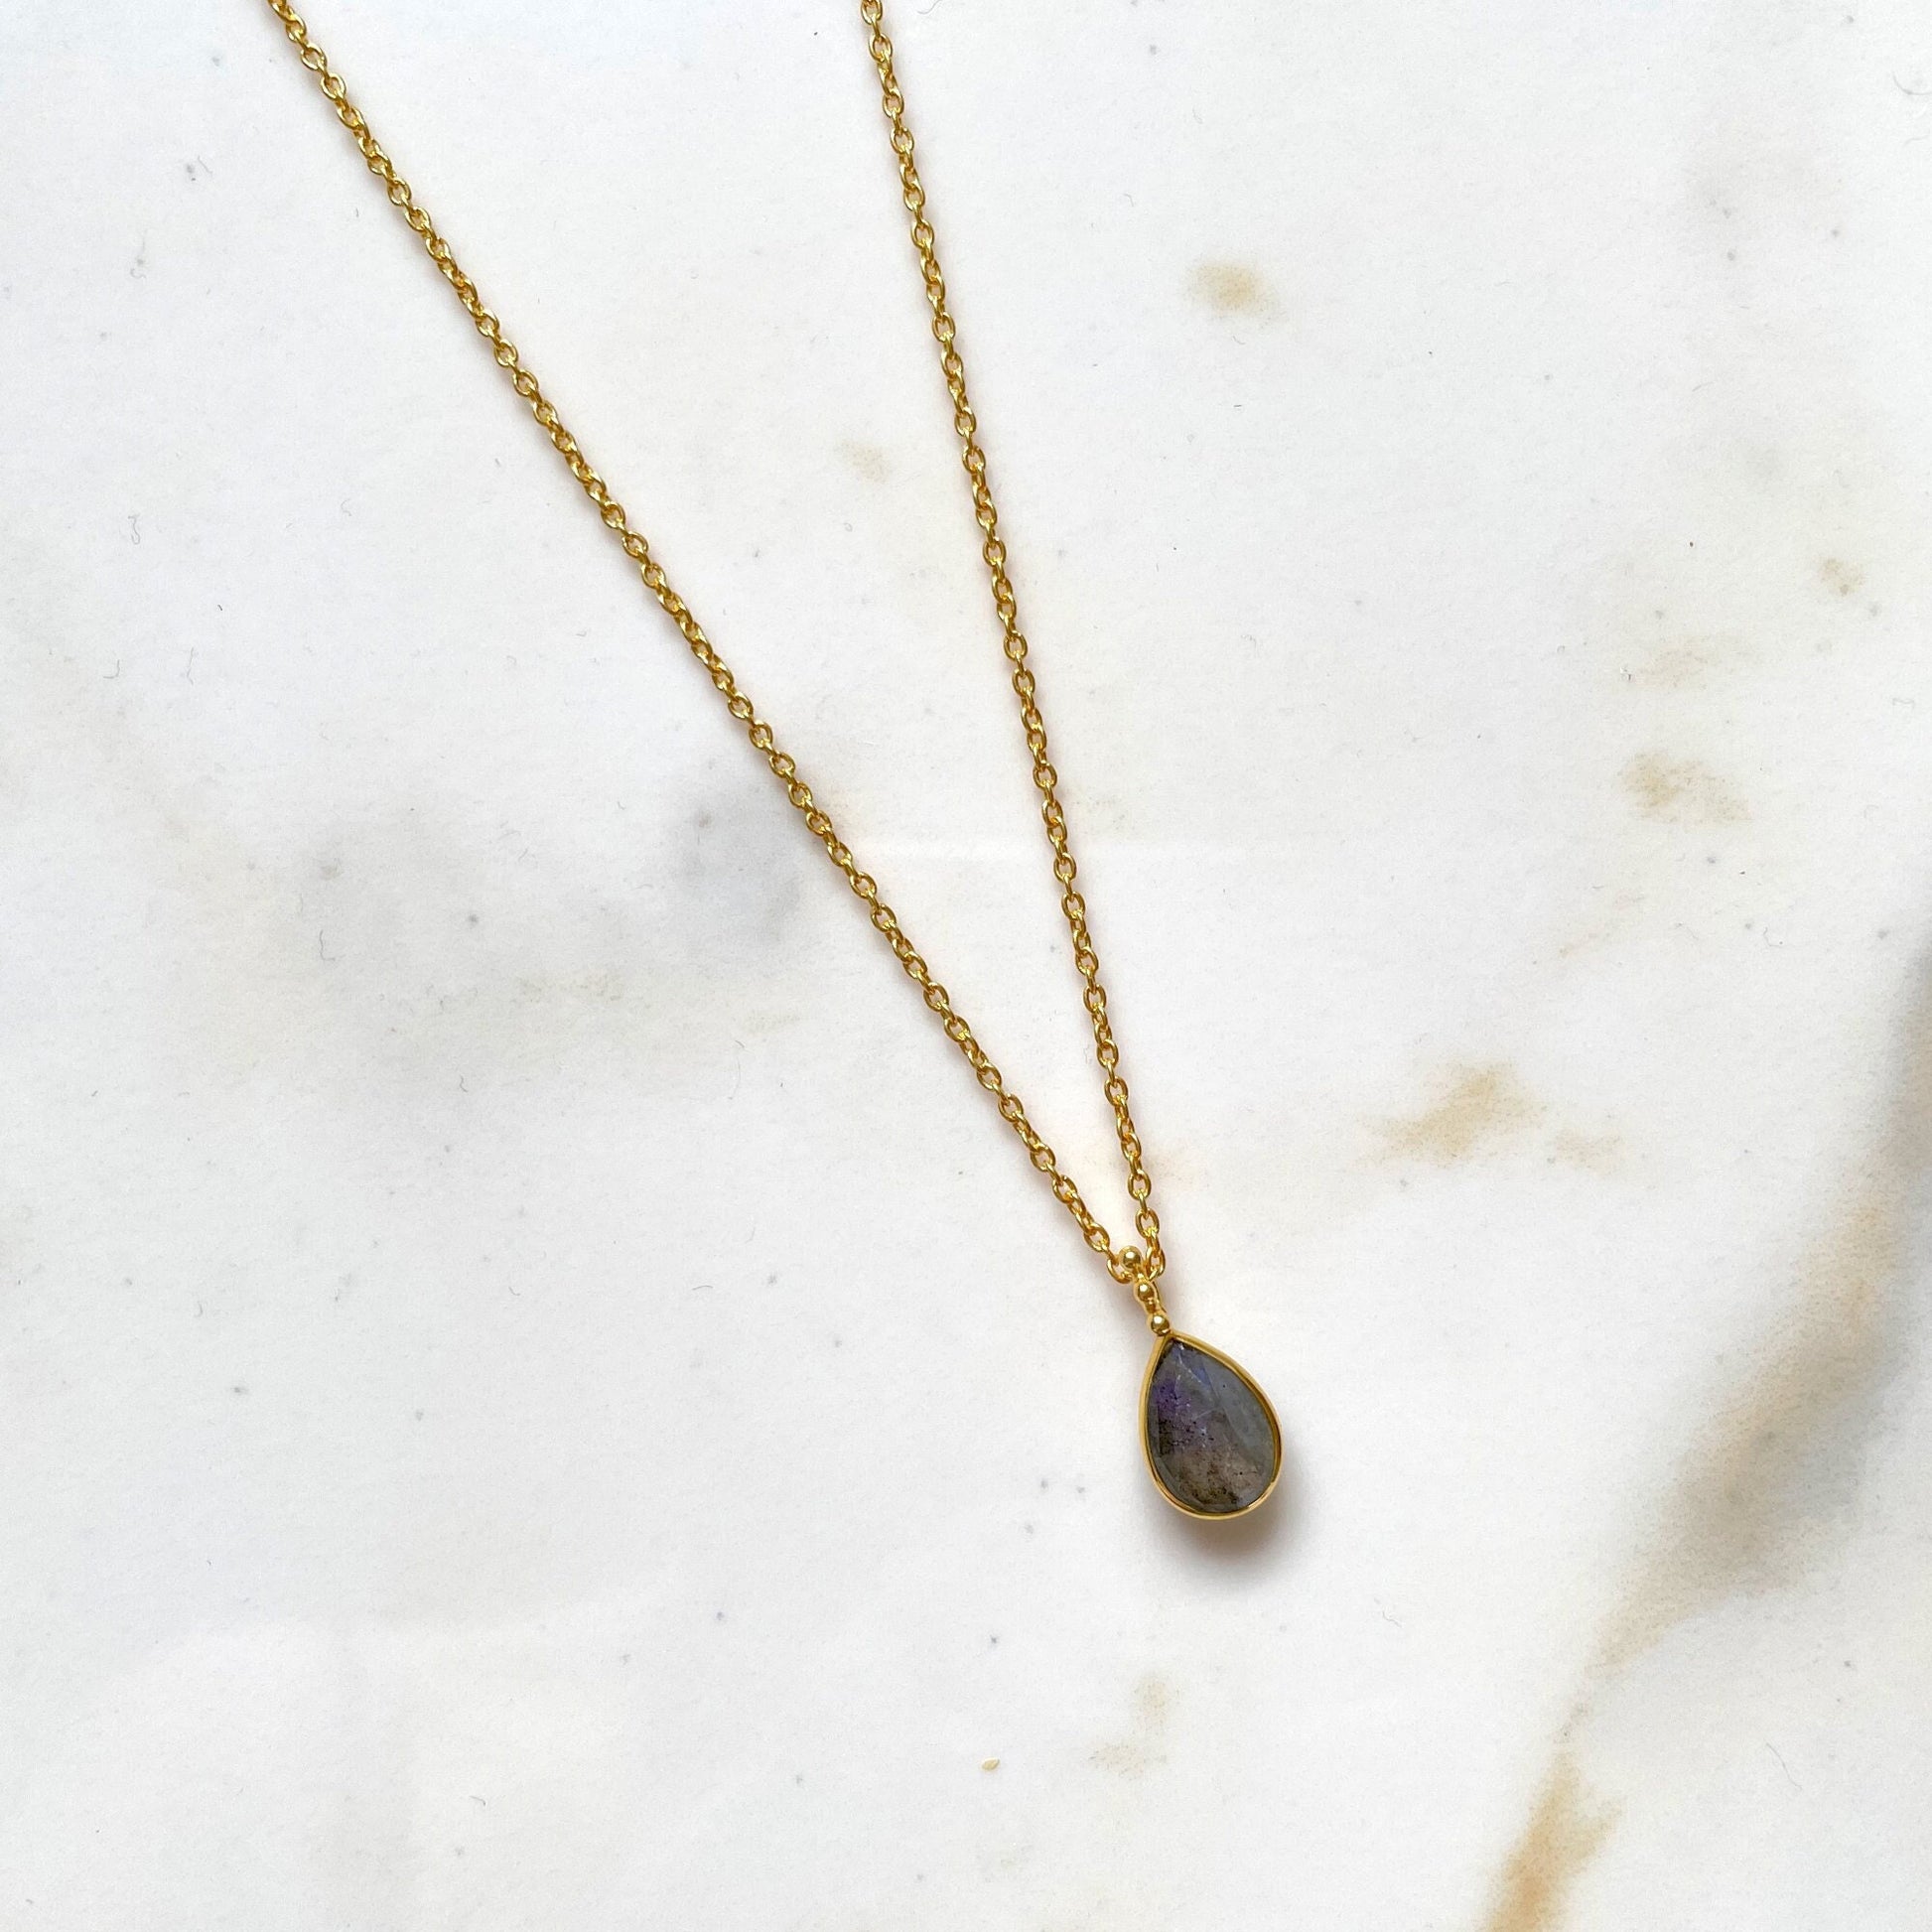 Lapradorite Necklace, Gold Plated on 925 Sterling Silver, handmade gemstone necklace by Brinda, Unique Gift for her, Unique necklace, gemstones, gold, chain, Crystal, trending, mothers day gift, small business, london, dainty necklace, Drop, Cute